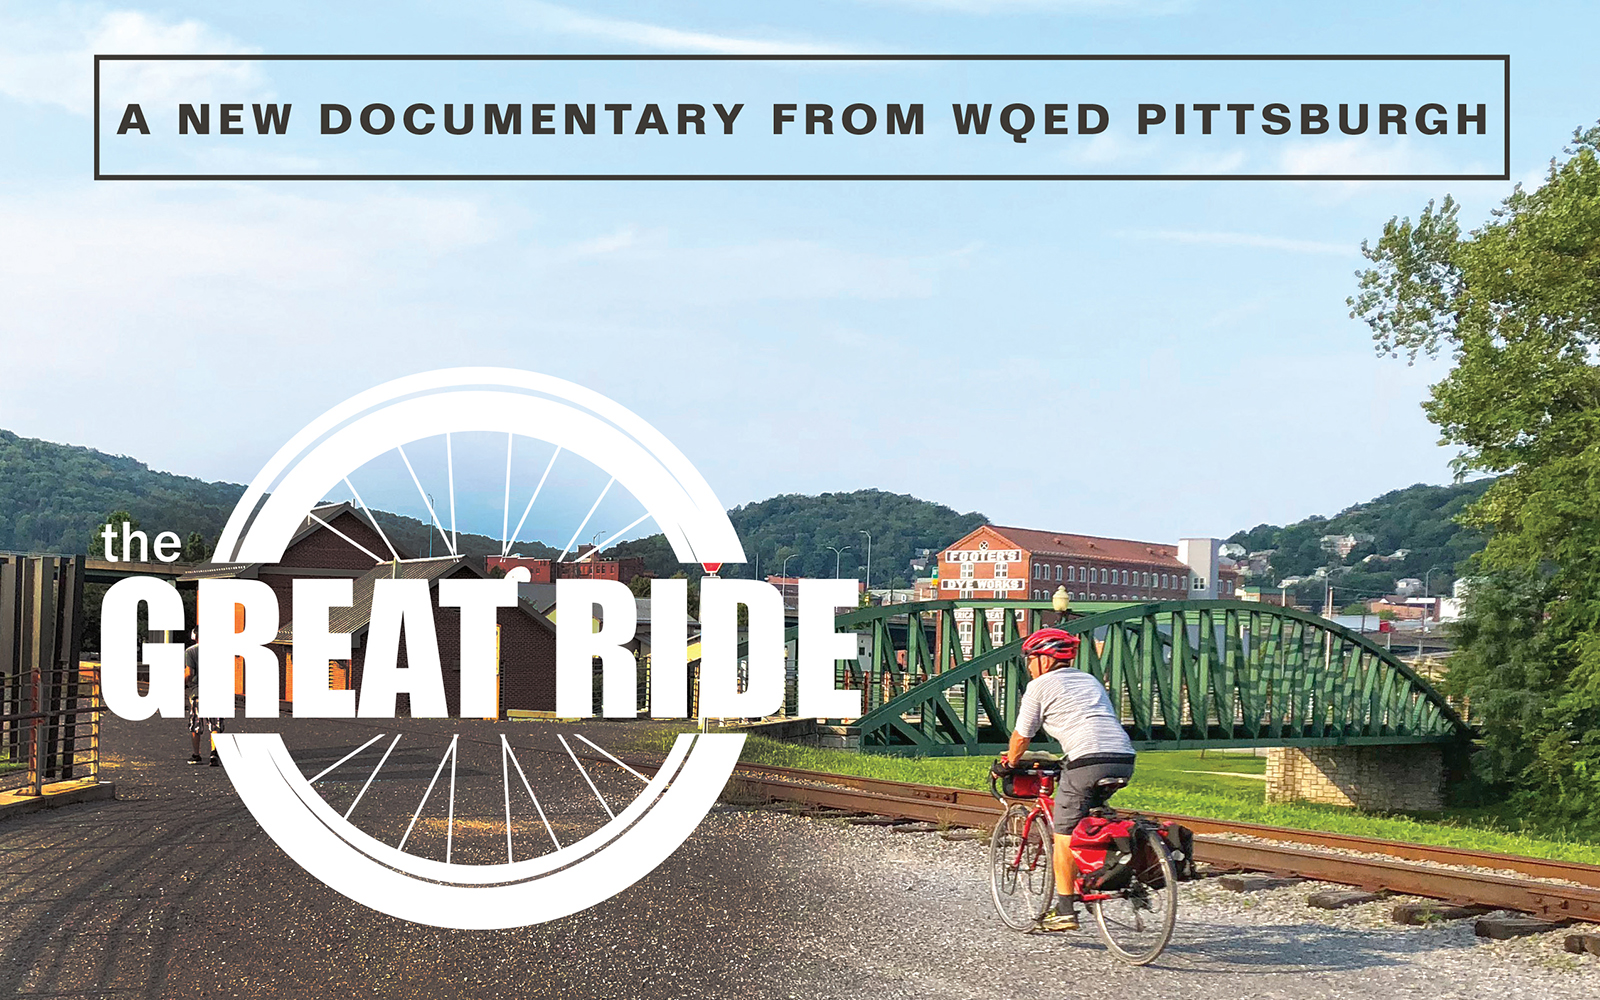 Biker on a trail with "The Great Ride" logo and copy that reads "A new documentary from WQED Pittsburgh"